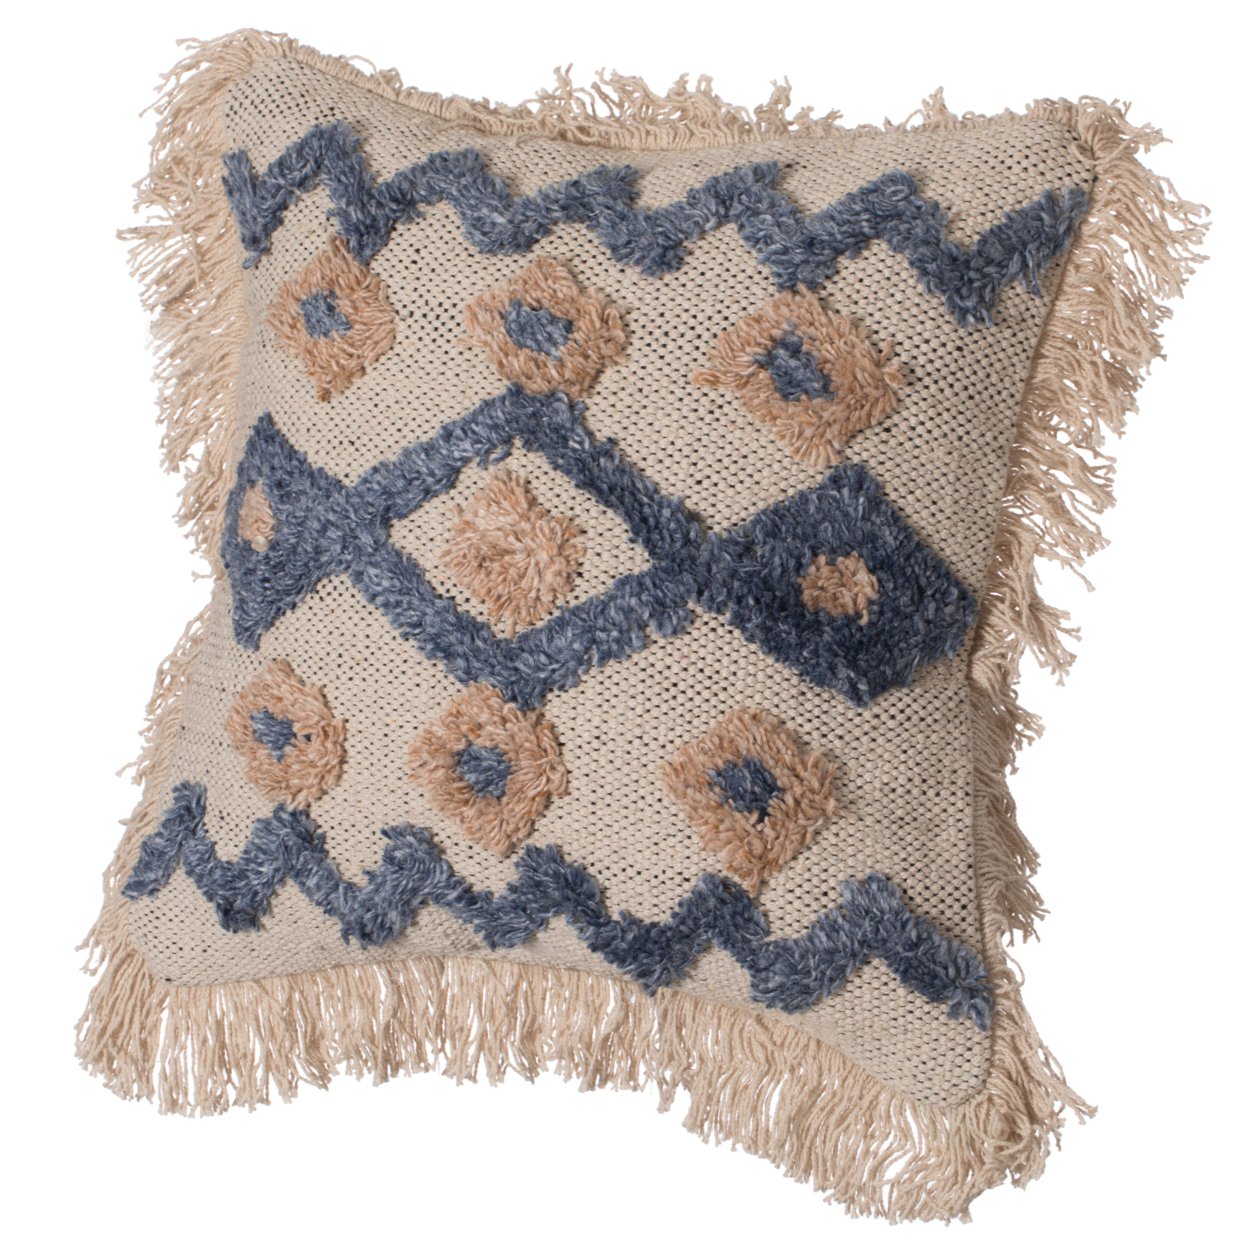 16" Handwoven Cotton & Silk Throw Fringed Pillow Cover Embossed Zig Zag & Crossed Lines Design - zig zag with cushion